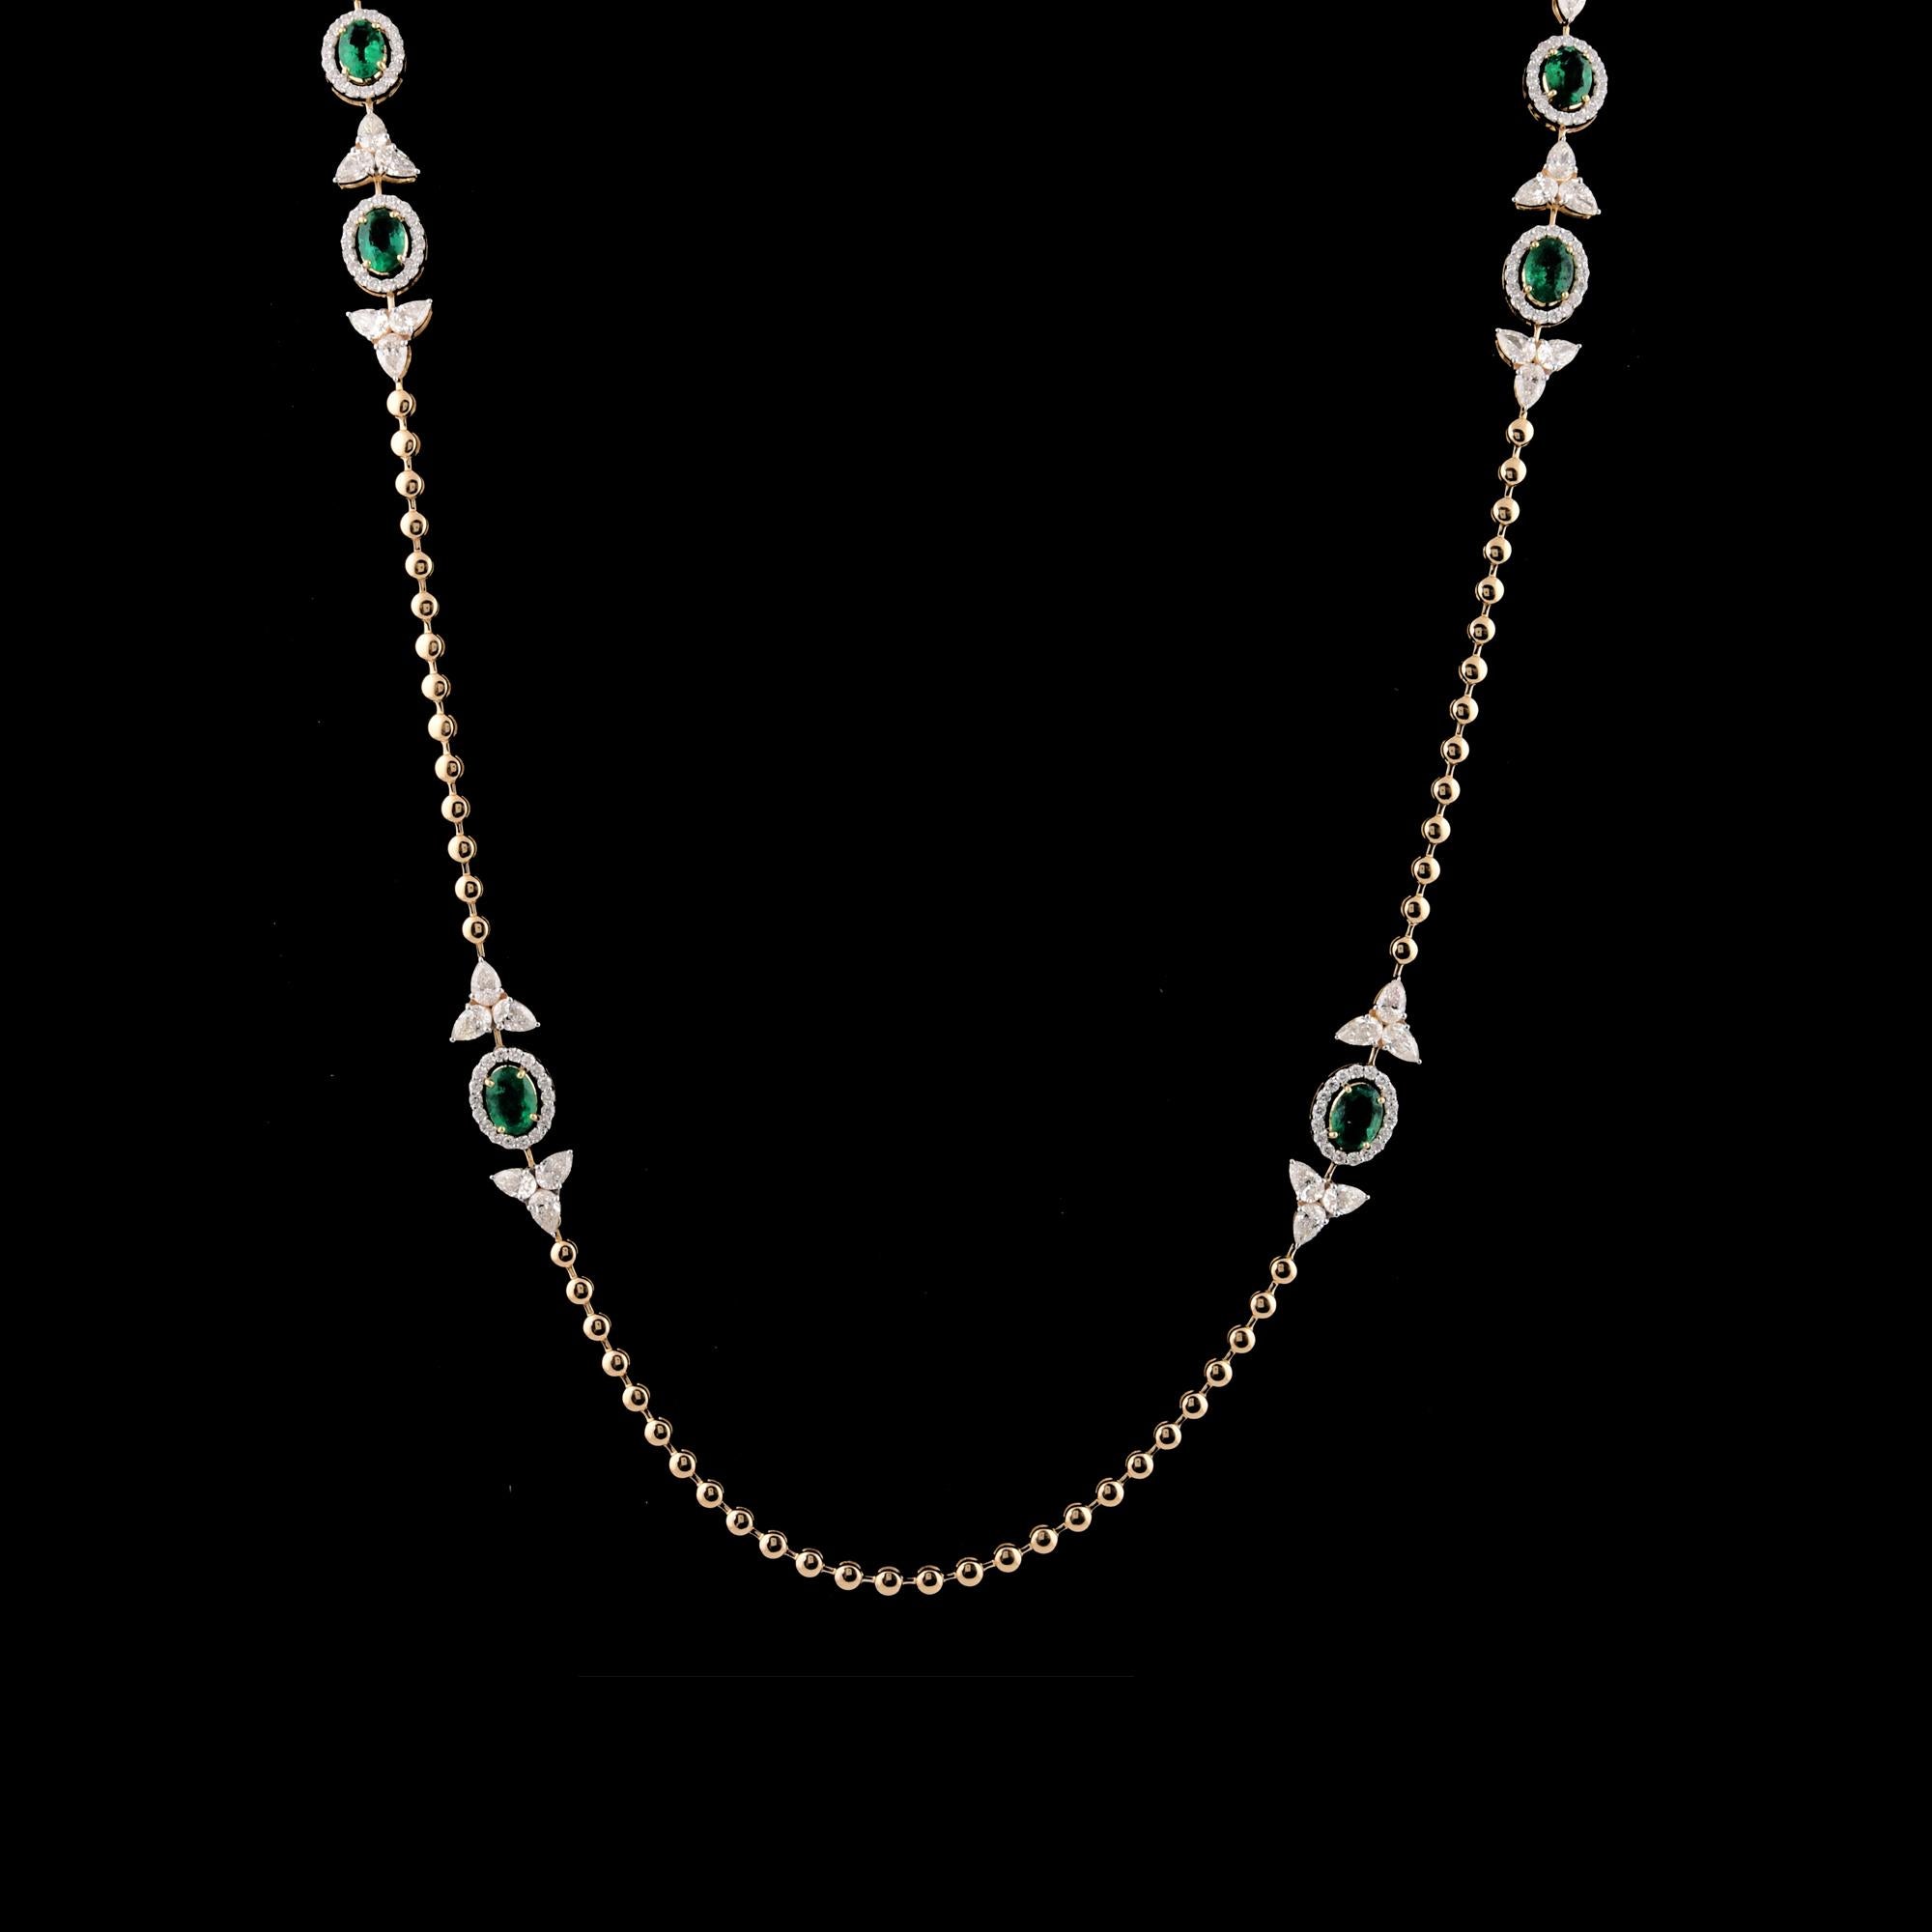 A charm necklace featuring a Zambian emerald gemstone and diamonds in 18 karat yellow gold is a stunning and elegant piece of jewelry. The necklace typically showcases a Zambian emerald as the centerpiece of the charm.

Item Code :- SEN-51166D
Gross